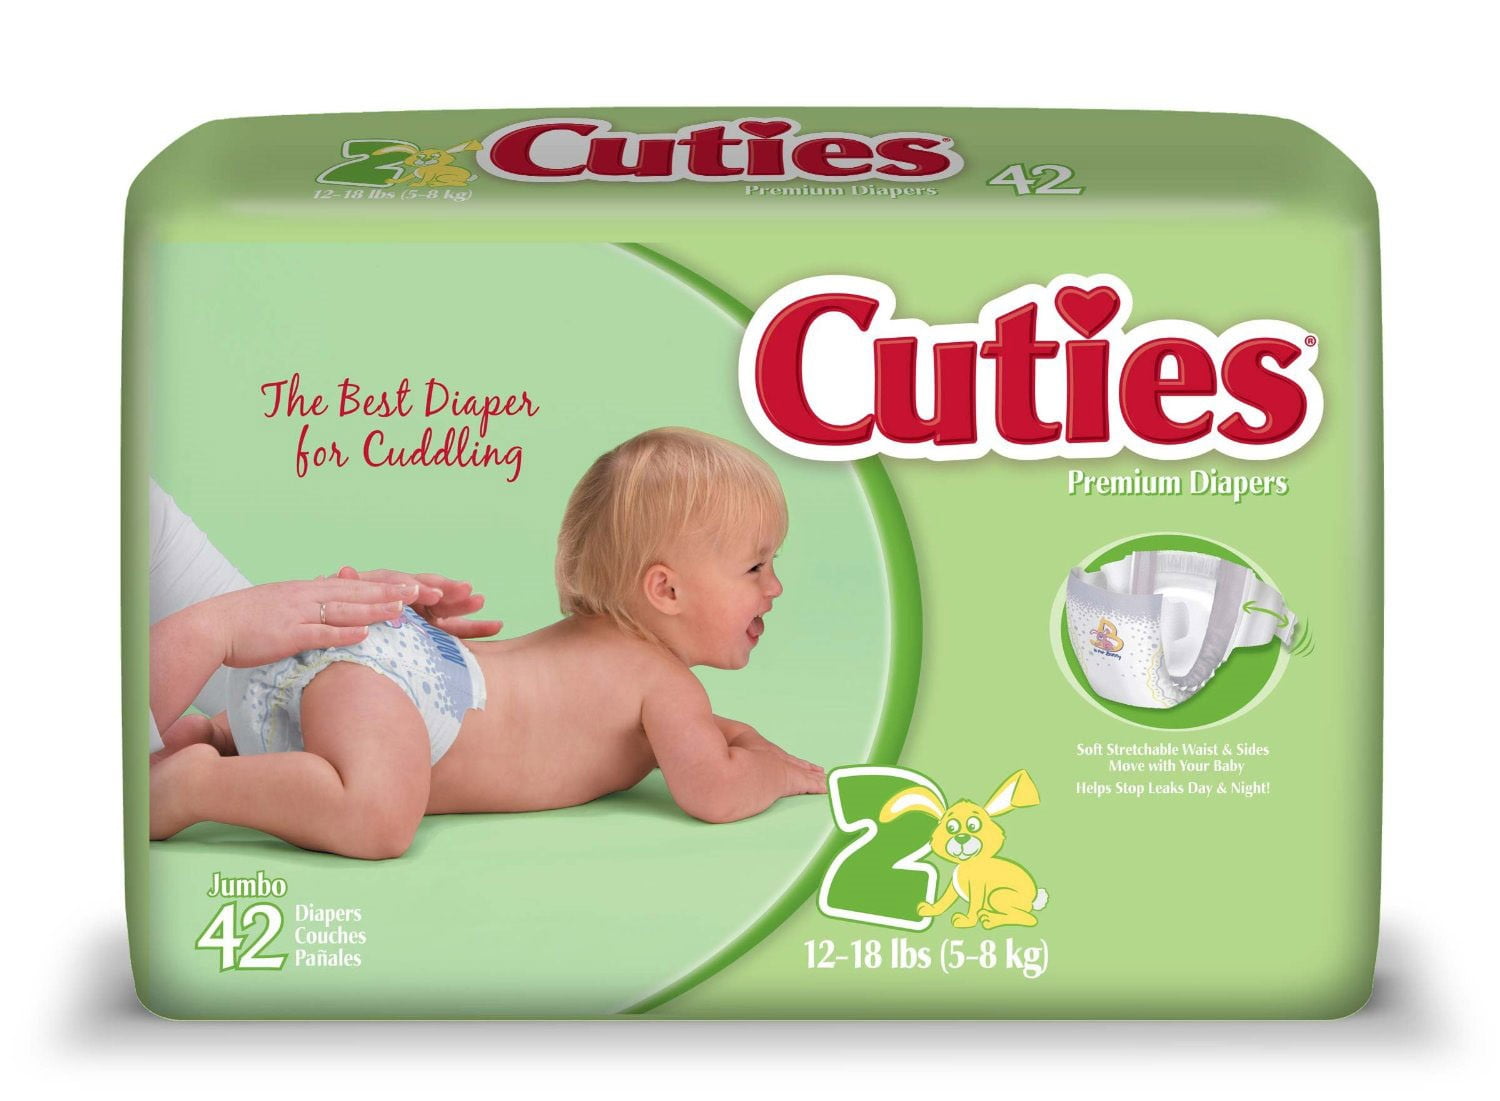 cheap diapers size 2